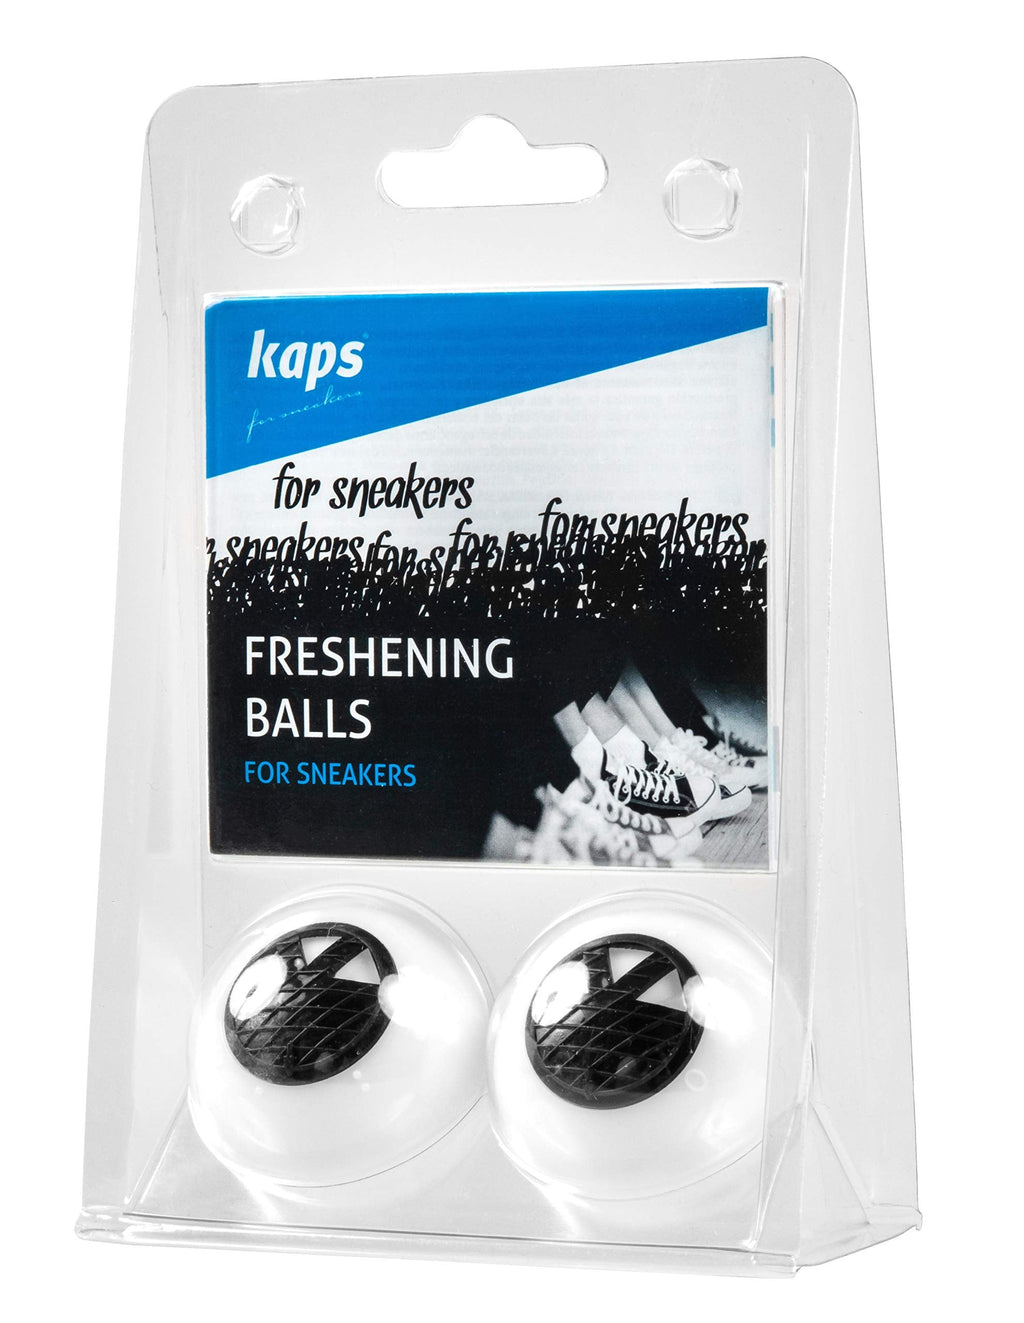 [Australia] - Freshening Sneakers Balls – Shoe Odour Eating Balls with Hydrogel Tech, Natural Aromas, Refreshing Preventing Bad Smell, Odor Buster Shoe Scent, by Kaps 